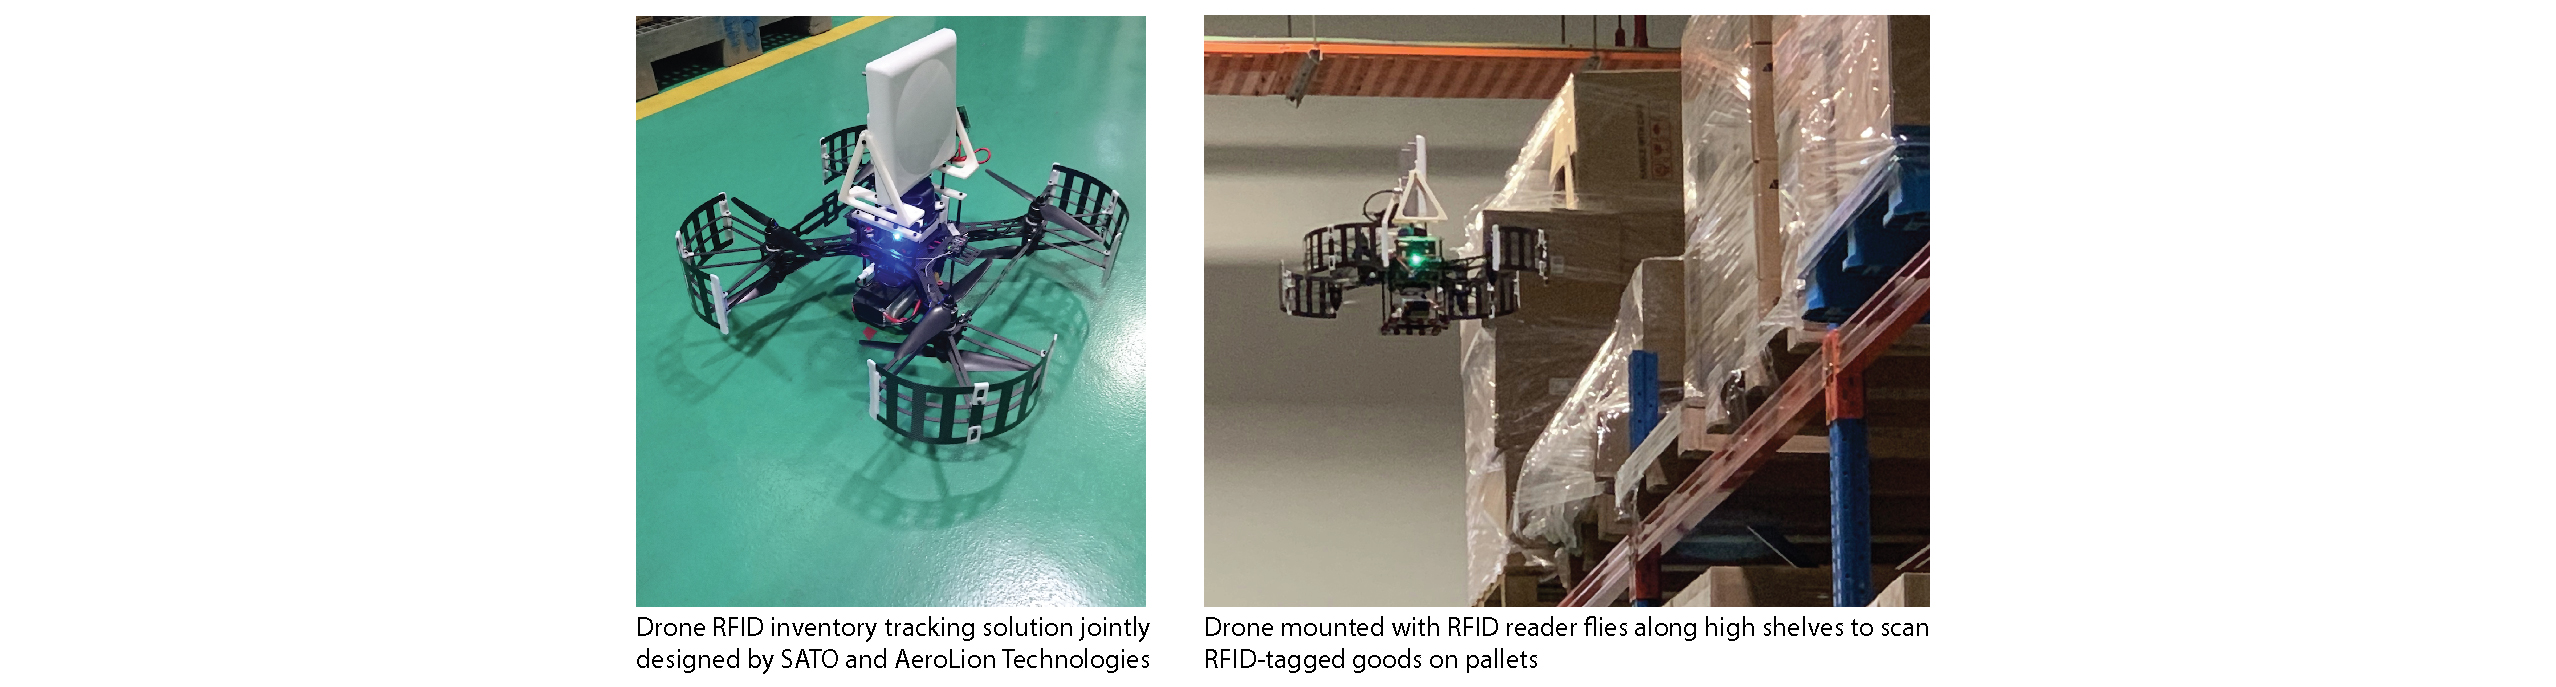 Drone RFID inventory tracking solution by SATO and AeroLion Technologies